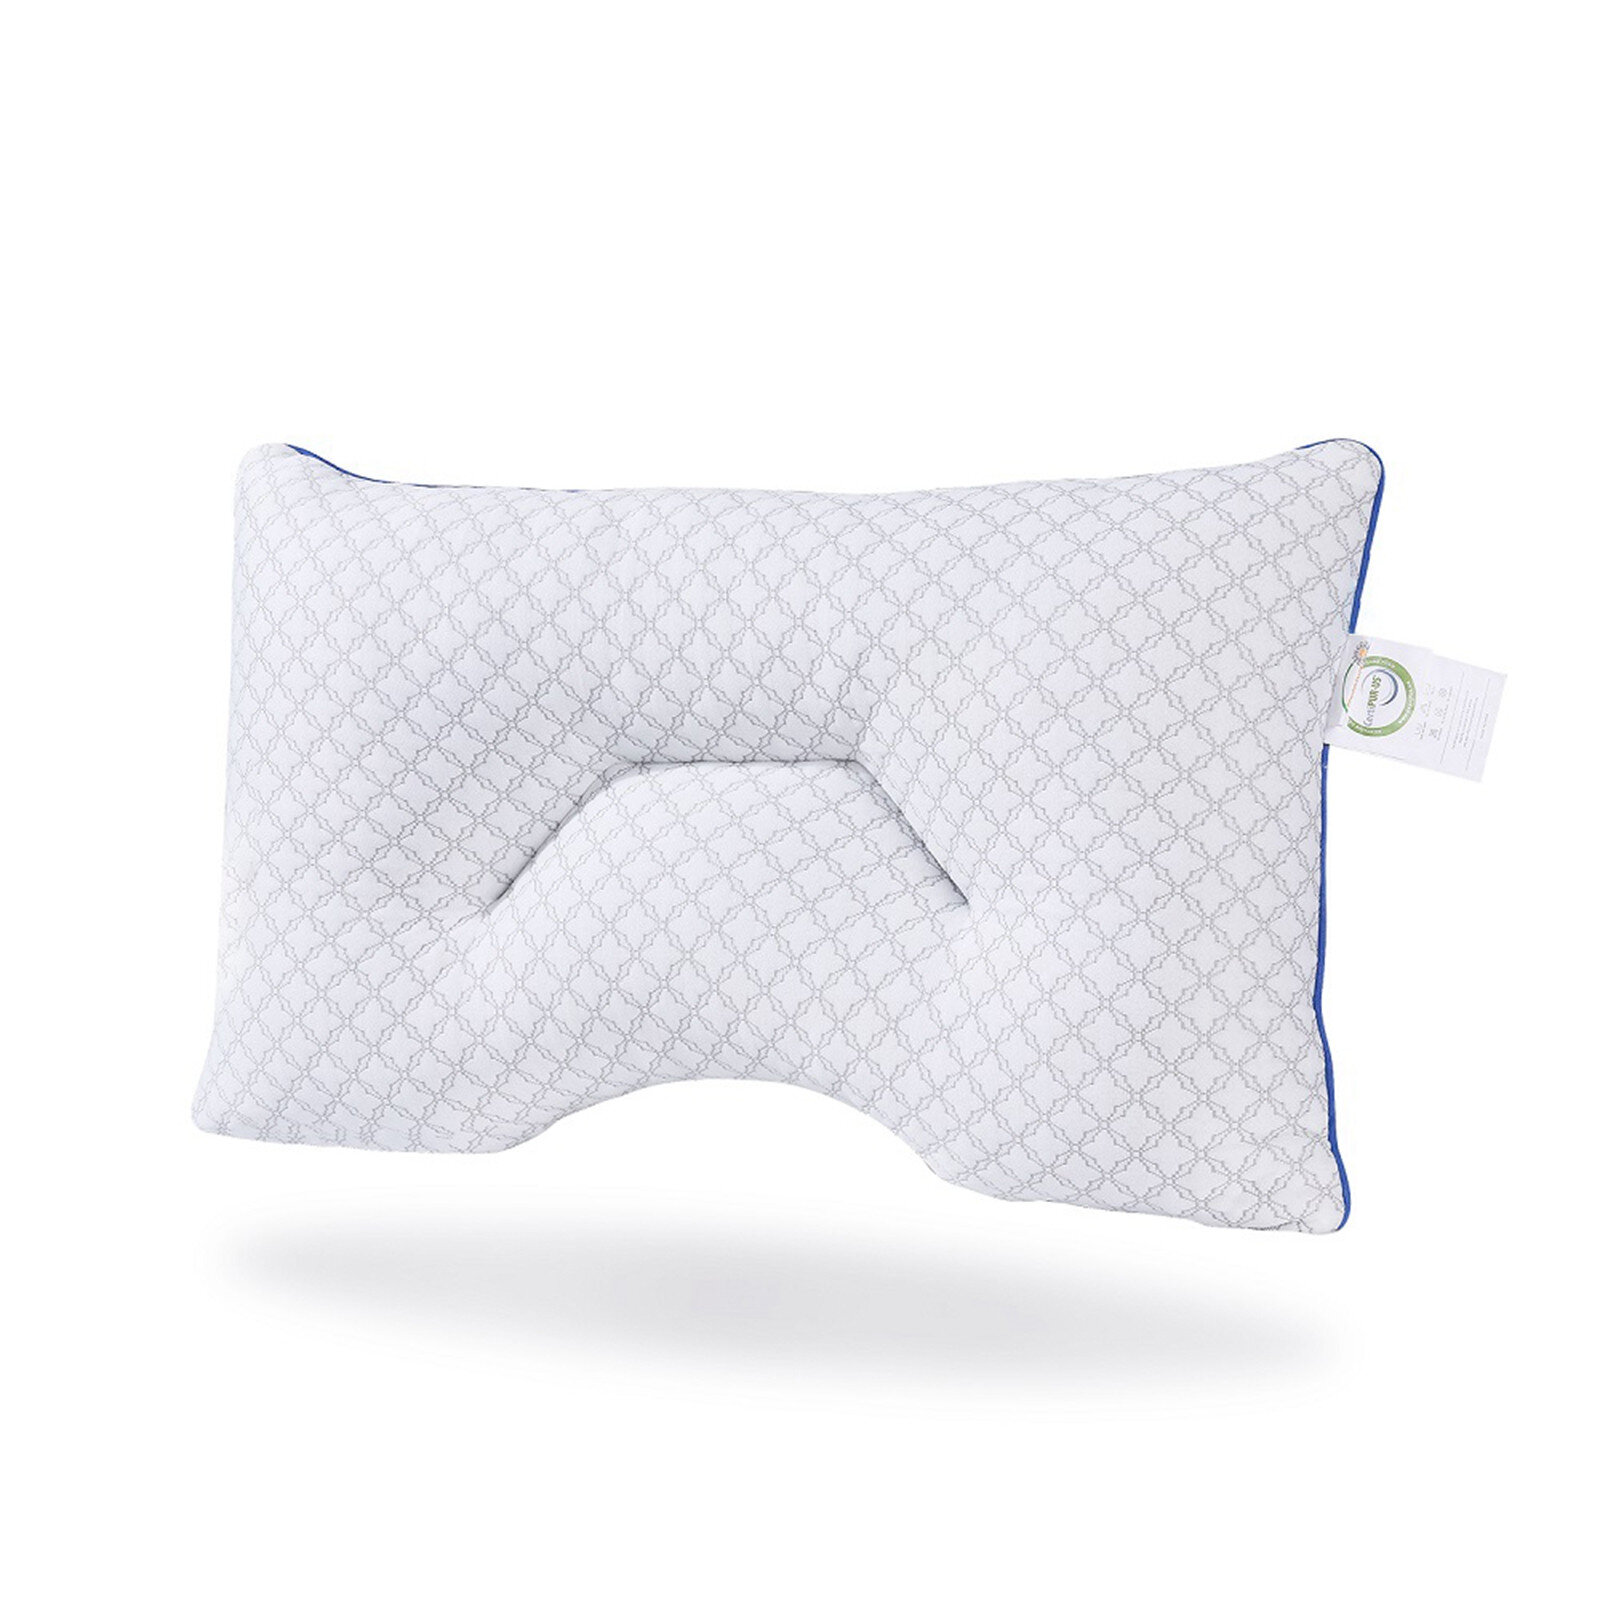 Washable Cover- Lady Size Back Stomach Sleeper with Breathable Cervical Pillows for Neck Pain Relief Orthopedic Neck Support Pillow for Side Memory Foam Pillow for Sleeping US Patent Design